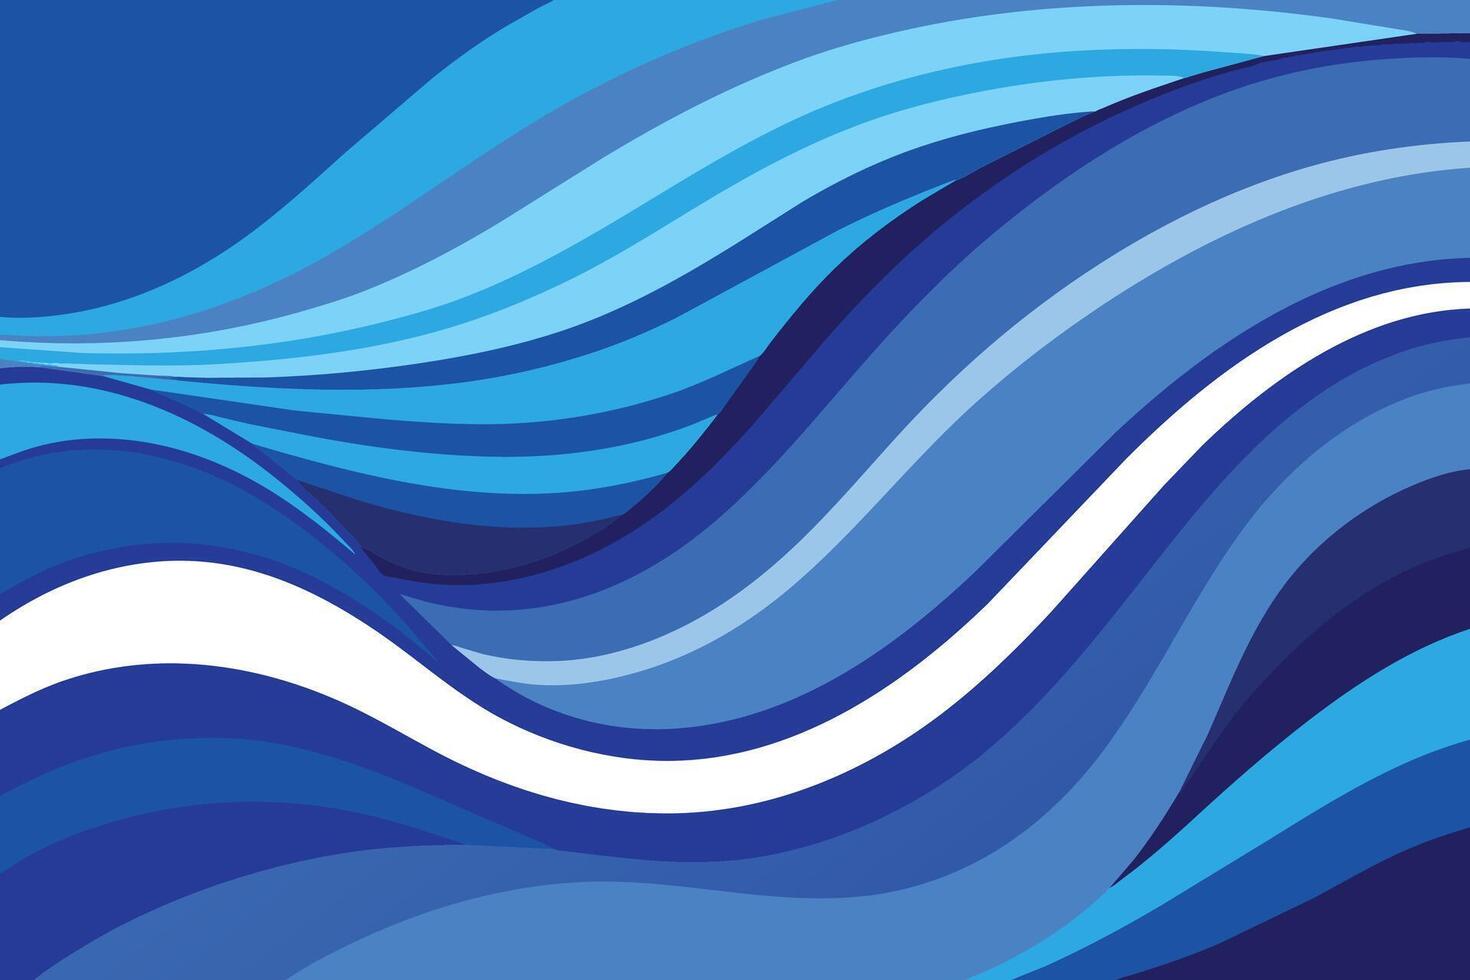 Abstract Blue Wave Background vector